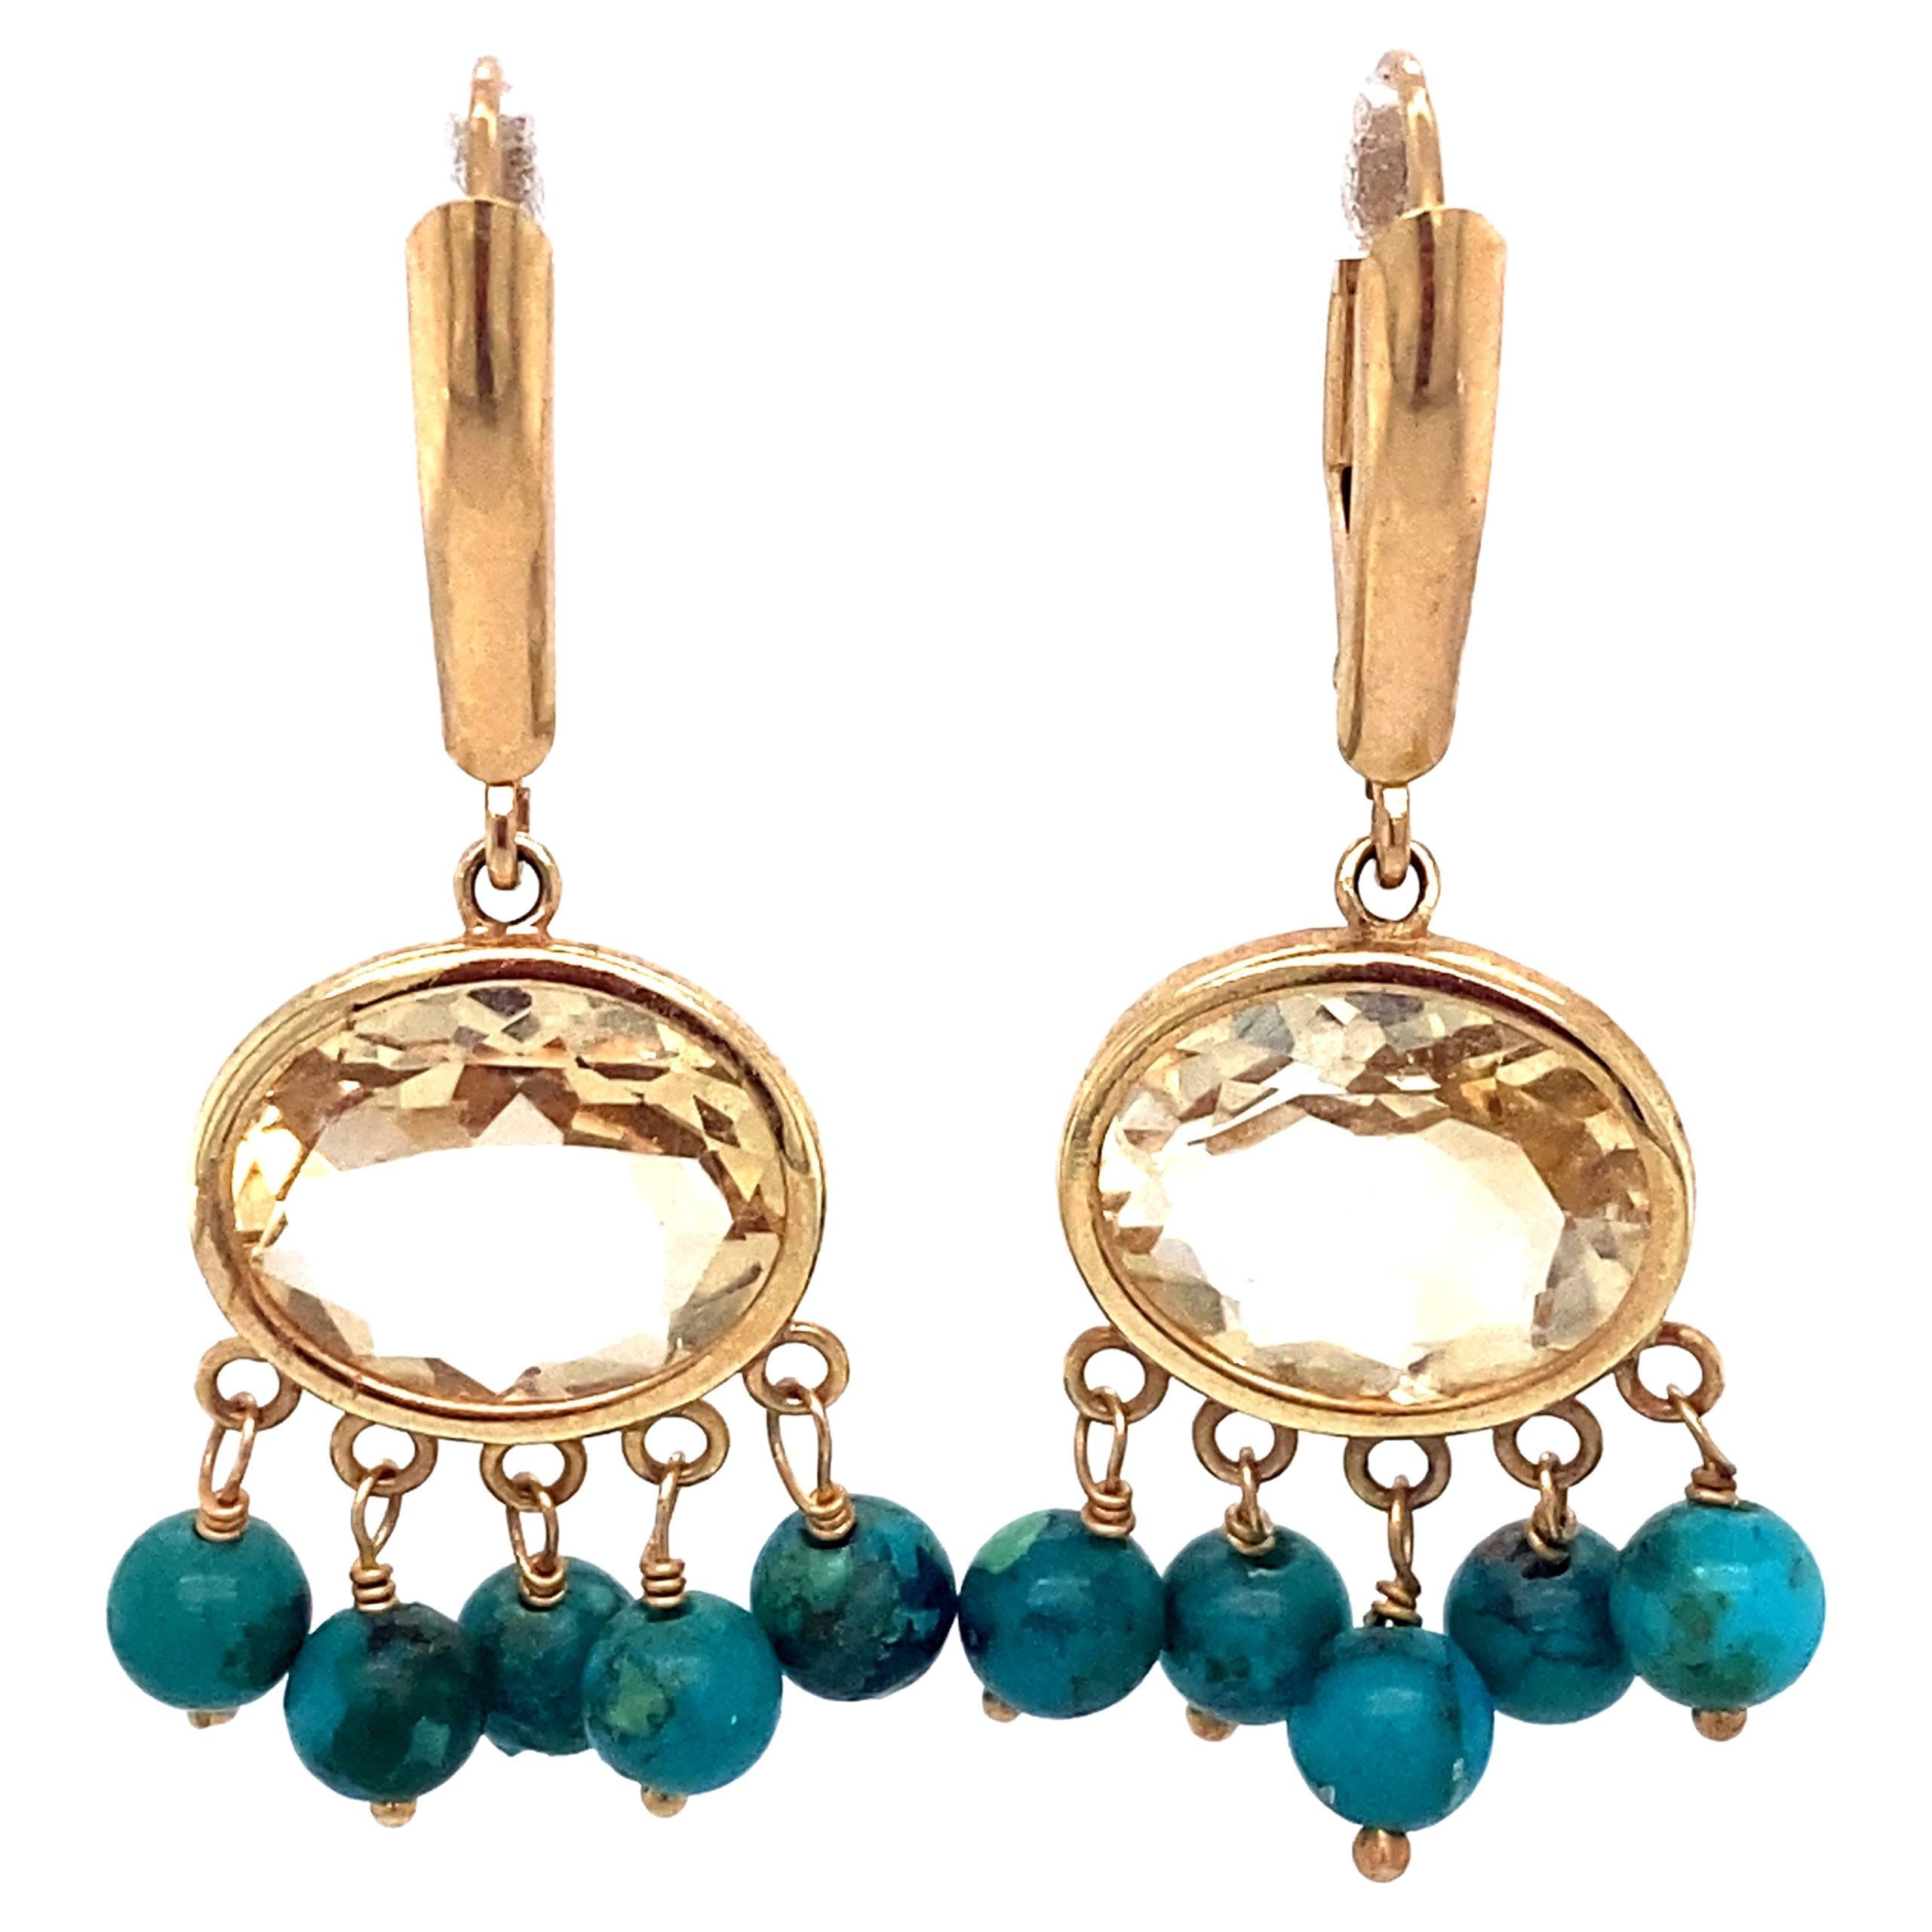 1960s Oval Citrine and Turquoise Bead Dangle Earrings in 14 Karat Gold